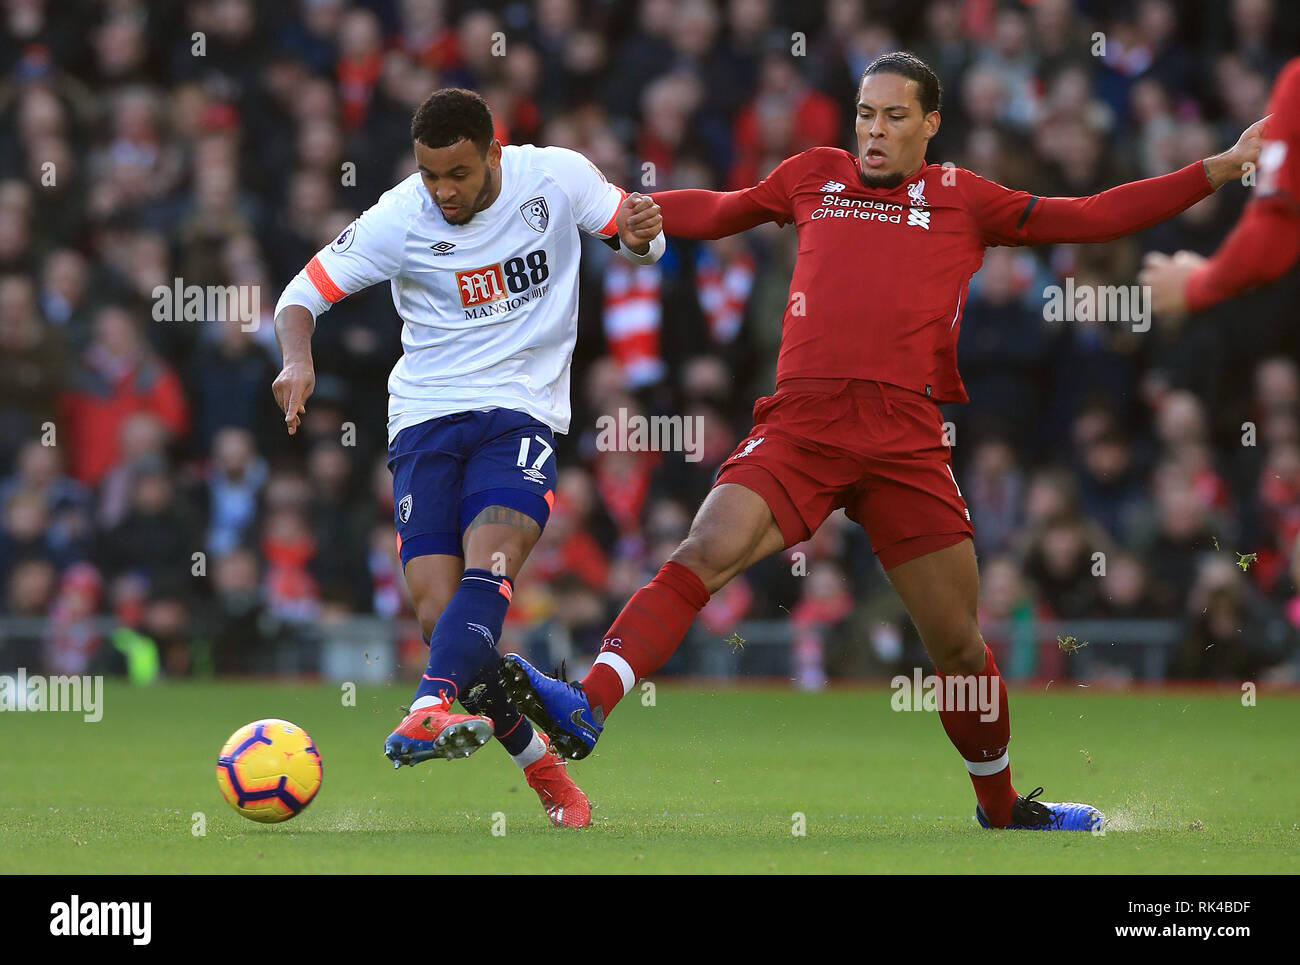 Bournemouth S Joshua King Left And Liverpool S Virgil Van Dijk Battle For The Ball During The Premier League Match At Anfield Liverpool Stock Photo Alamy